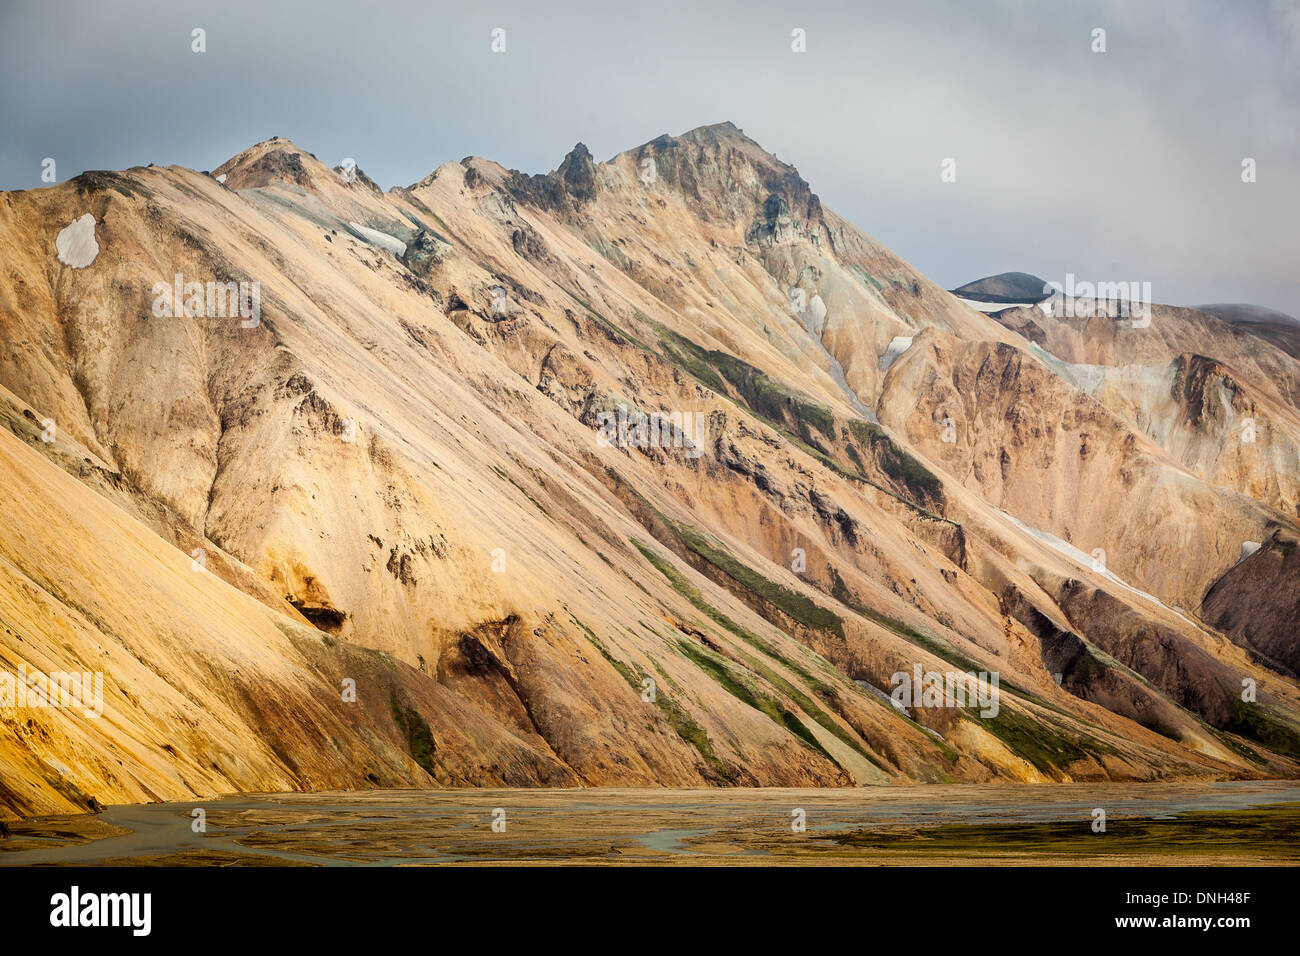 MOUNTAINS OF RHYOLITE IN LANDMANNALAUGAR, VOLCANIC AND GEOTHERMAL ZONE OF WHICH THE NAME LITERALLY MEANS 'HOT BATHS OF THE PEOPLE OF THE LAND', REGION OF THE HIGH PLATEAUS, SOUTHERN ICELAND, EUROPE Stock Photo